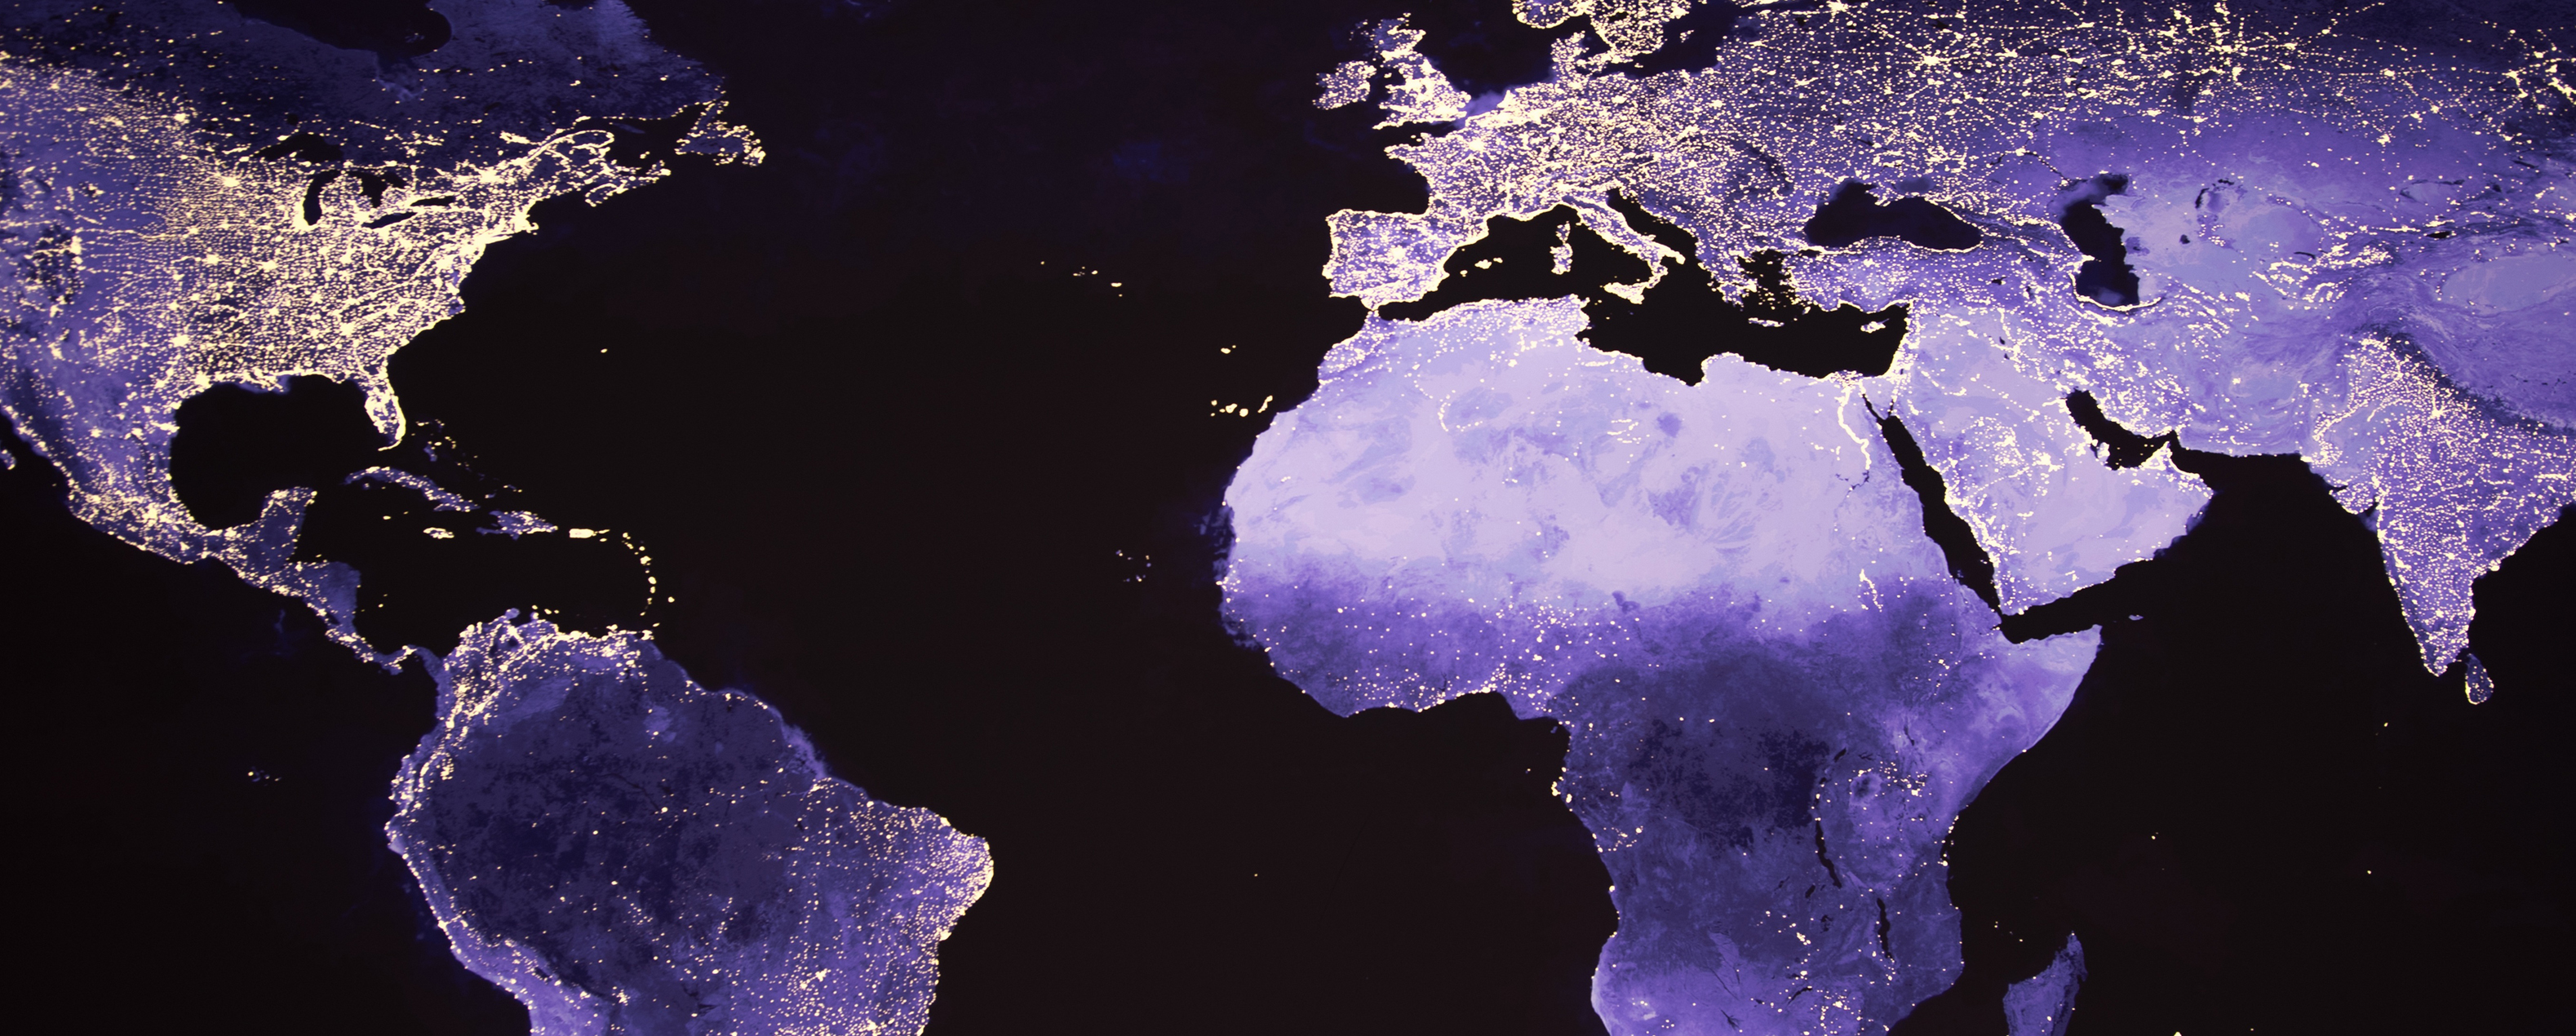 World map standing out in purple with glowing areas of land